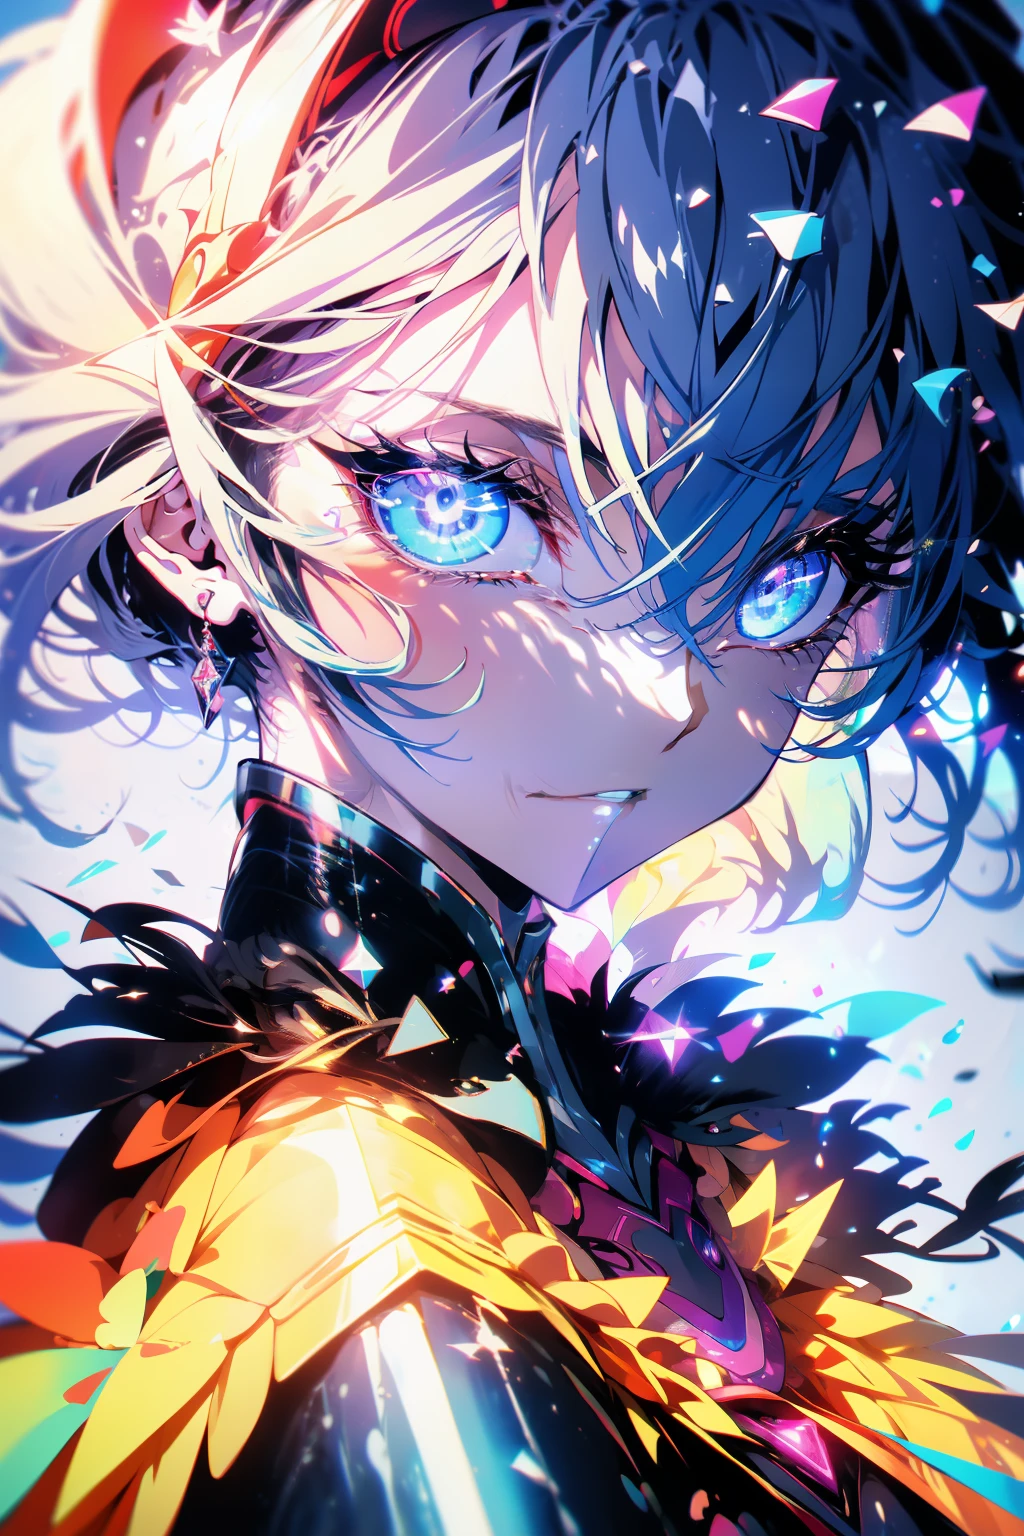 Close-up of a man with a futuristic design on his face, Badass anime 8 K, yugioh art style, 4k anime wallpapers, 4k anime wallpapers, Anime art wallpaper 8k, 4K anime style, Anime art wallpaper 4k, Anime art wallpaper 4k, 4k anime wallpapers, Eugio art, detailed digital anime art, ((tmasterpiece, best qualityer)), (complex light), Perfect hands, Normal fingers, hyper-detailing, vivd colour.